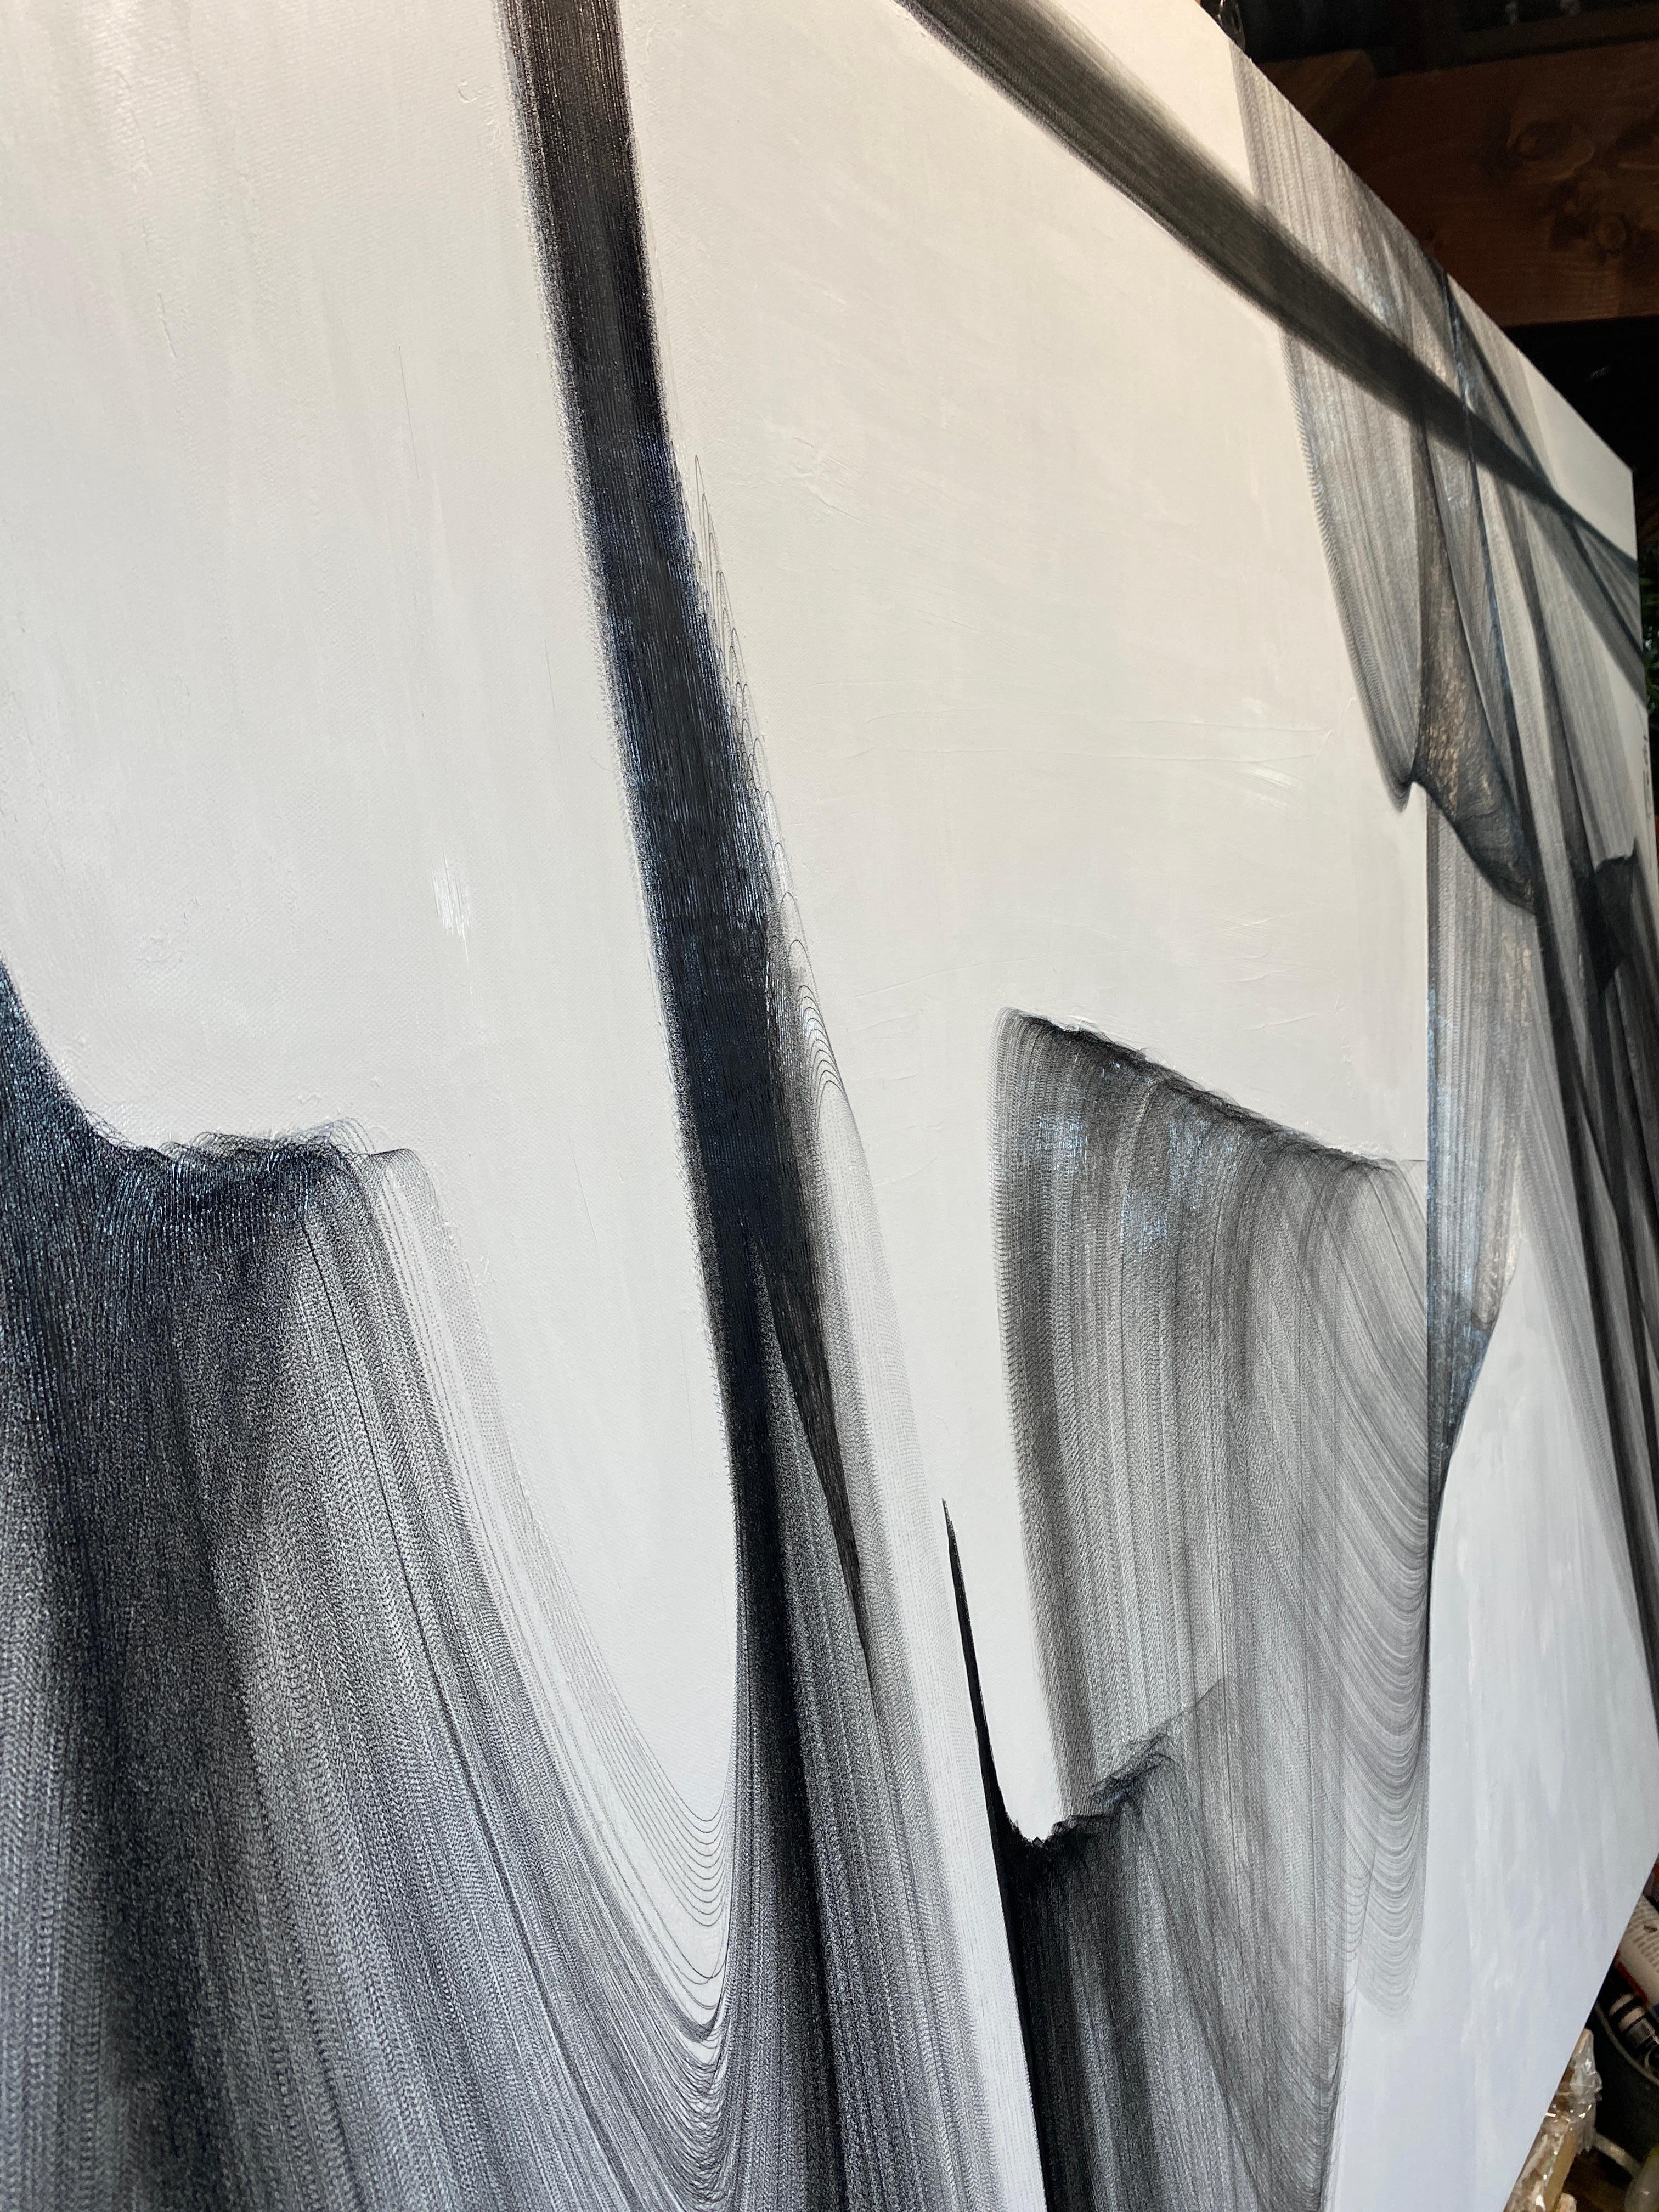 40H x 60W inch, Innovative and Contemporary Original New Media Abstract Black And White Work on Canvas
Minimalist New Media Original Painting on Canvas

❘❘❙❙❚❚ Invest in original paintings today! ❘❙❙❚❚  Discover Art You Love. 
Start and build your